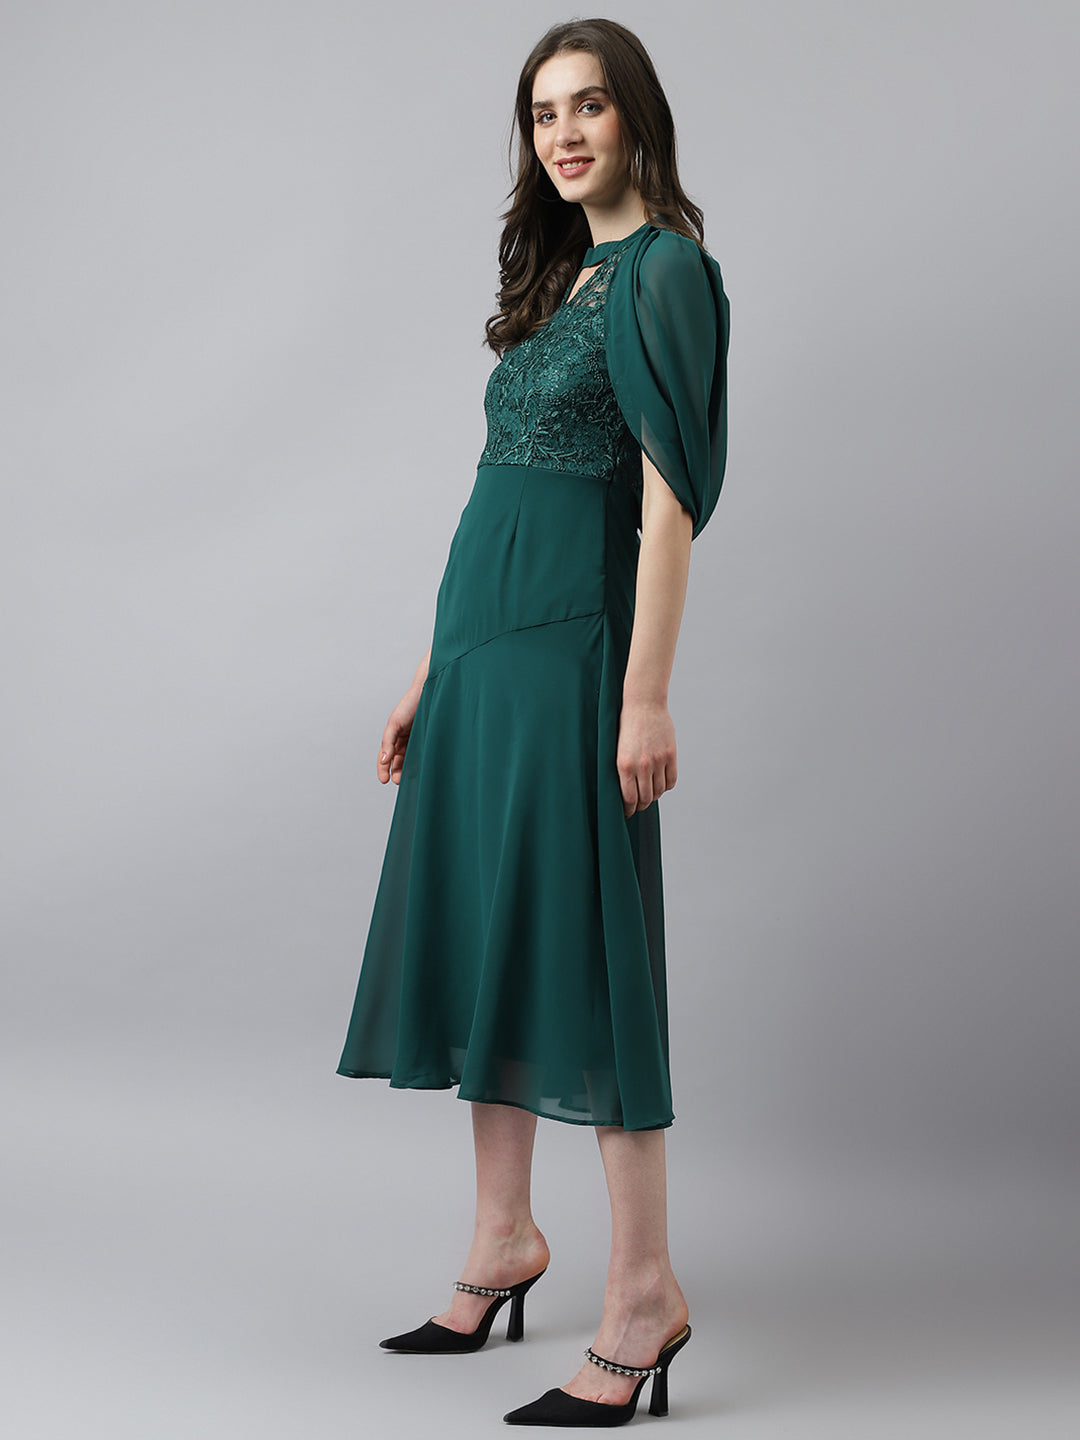 Green A-Line Lace Designer Dress With Cape Sleeves